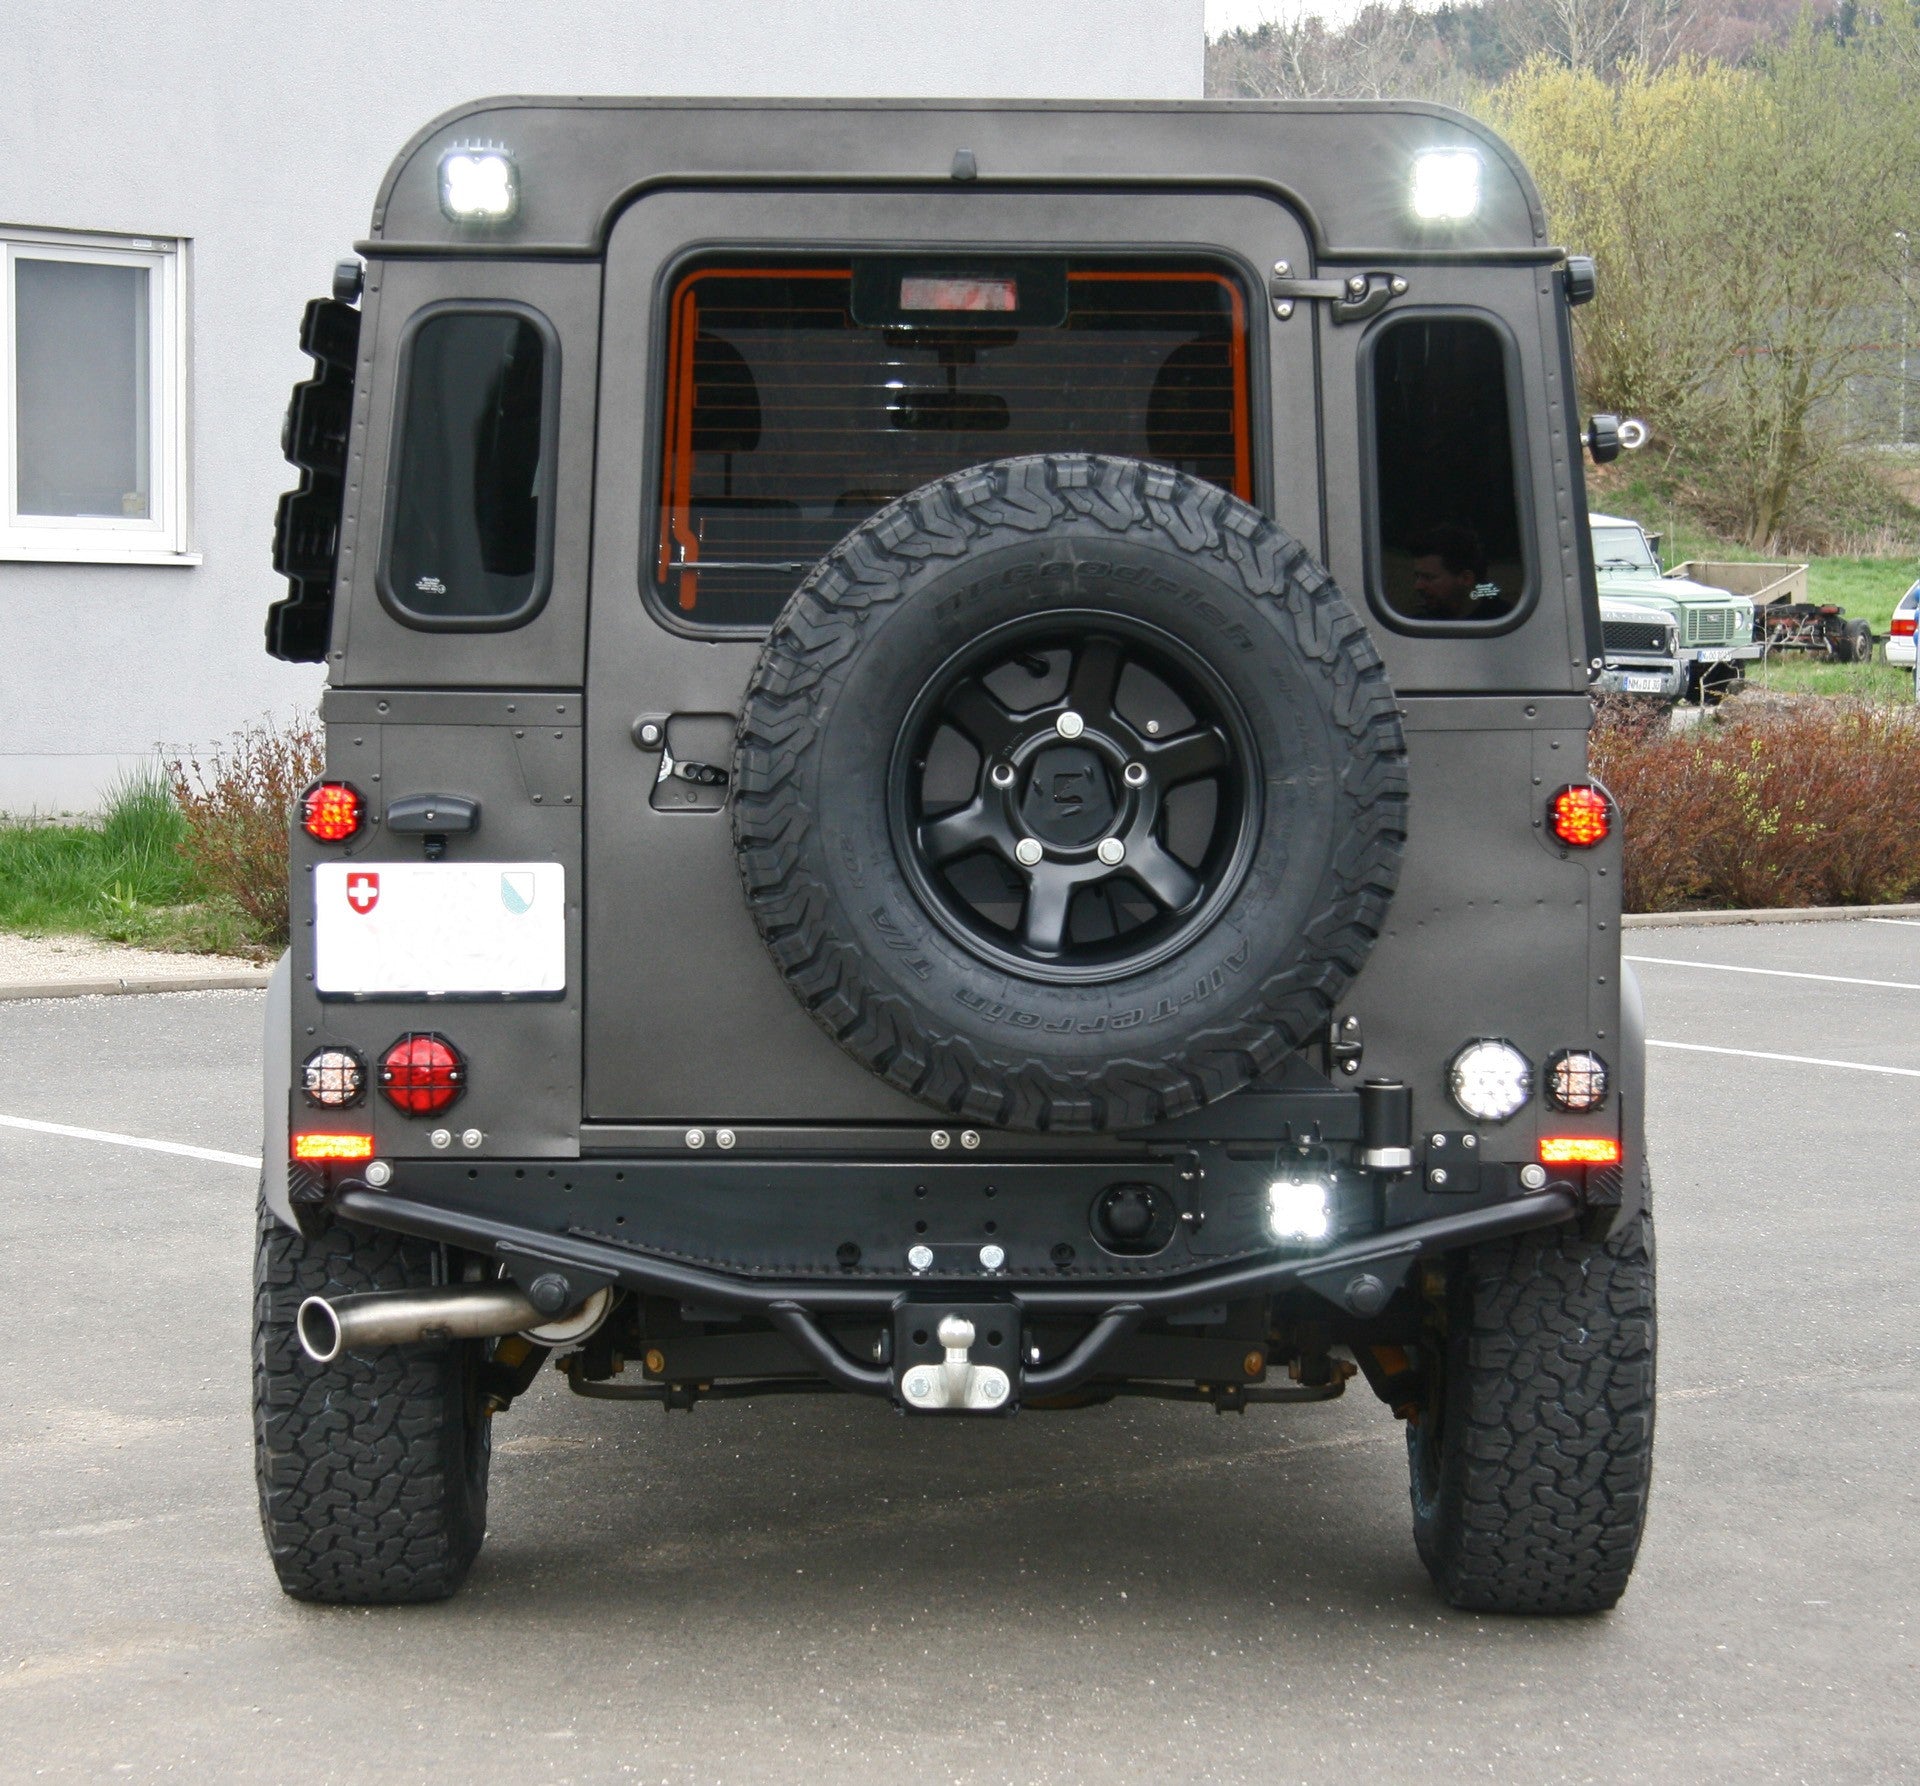 Defender Station Wagon Swing Away Tire Carrier (stainless steel & black powdercoated) - for Land Rover 90/110